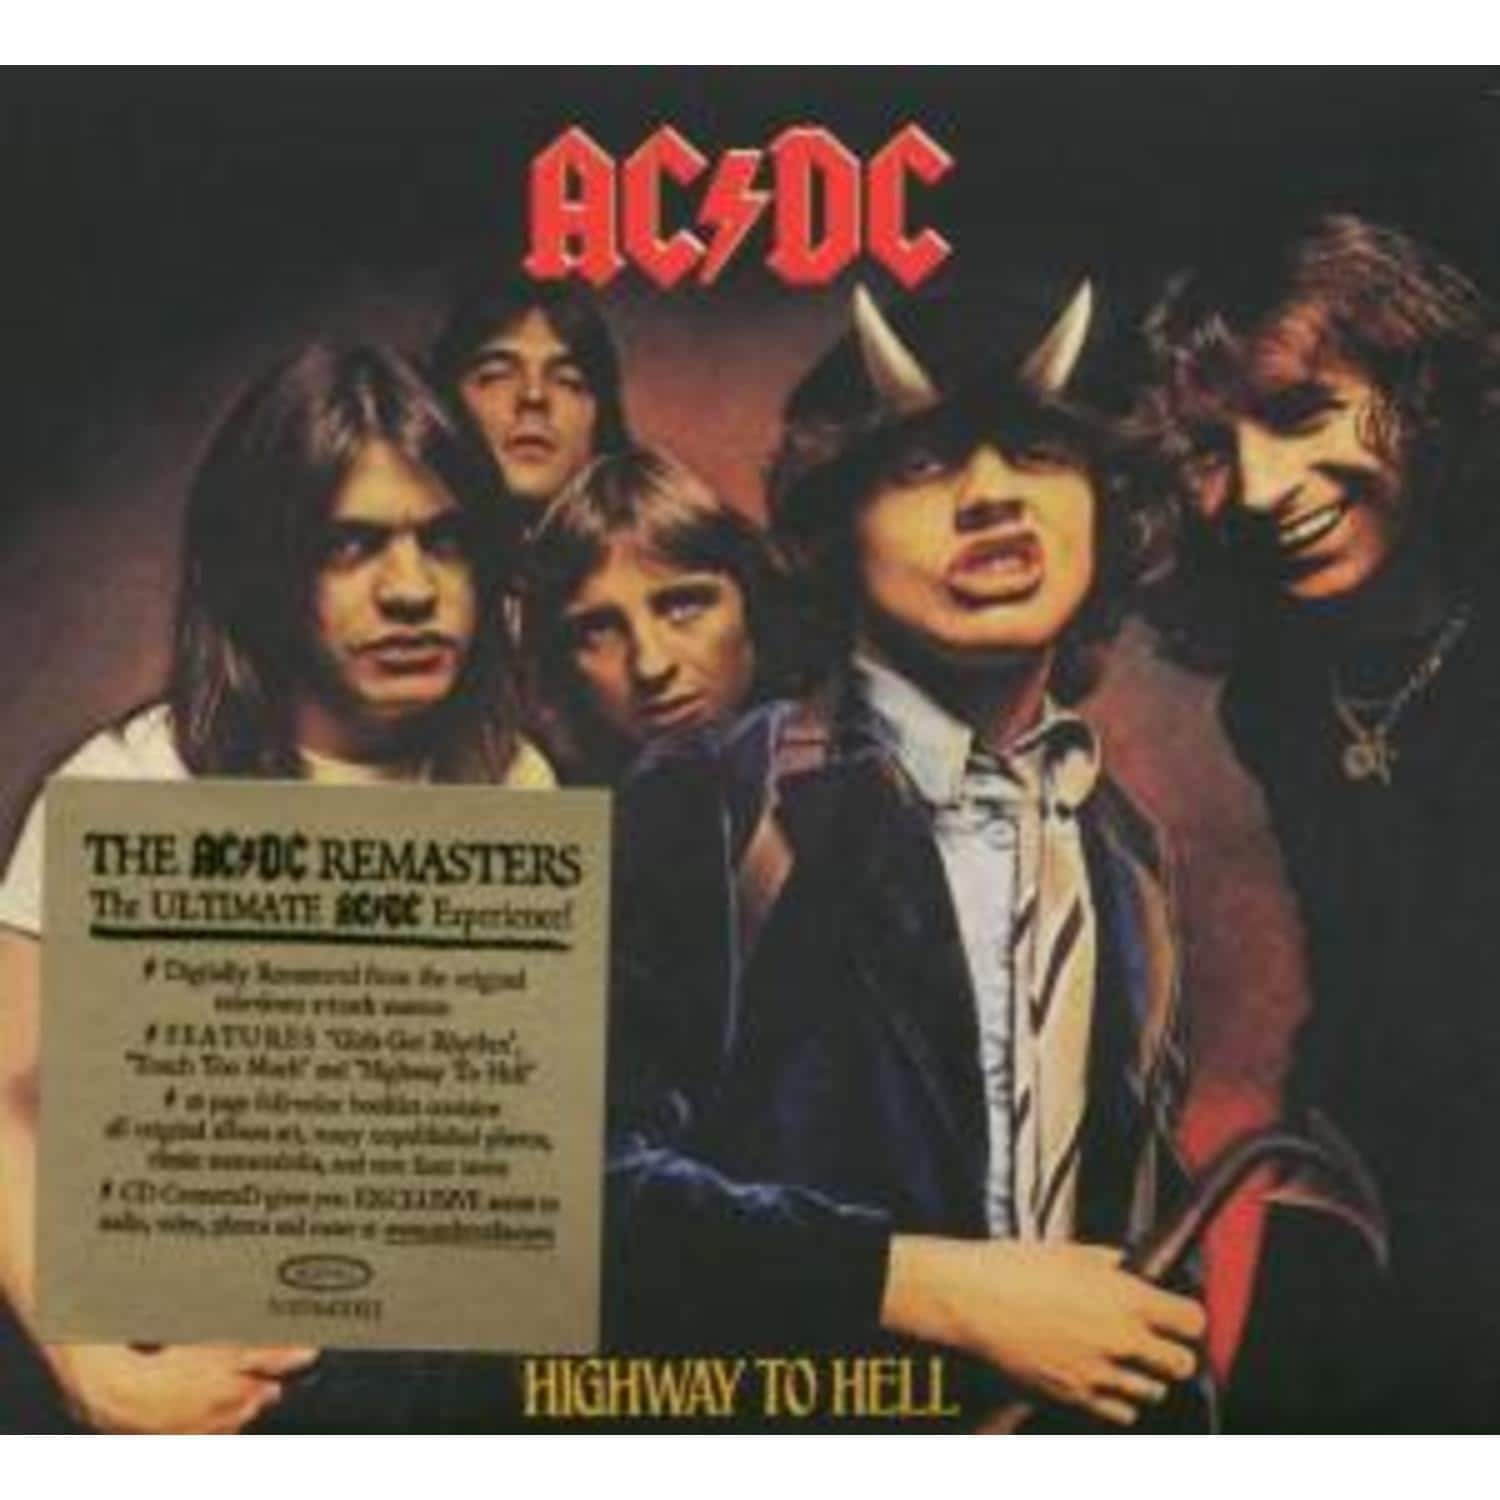 AC/DC - HIGHWAY TO HELL 